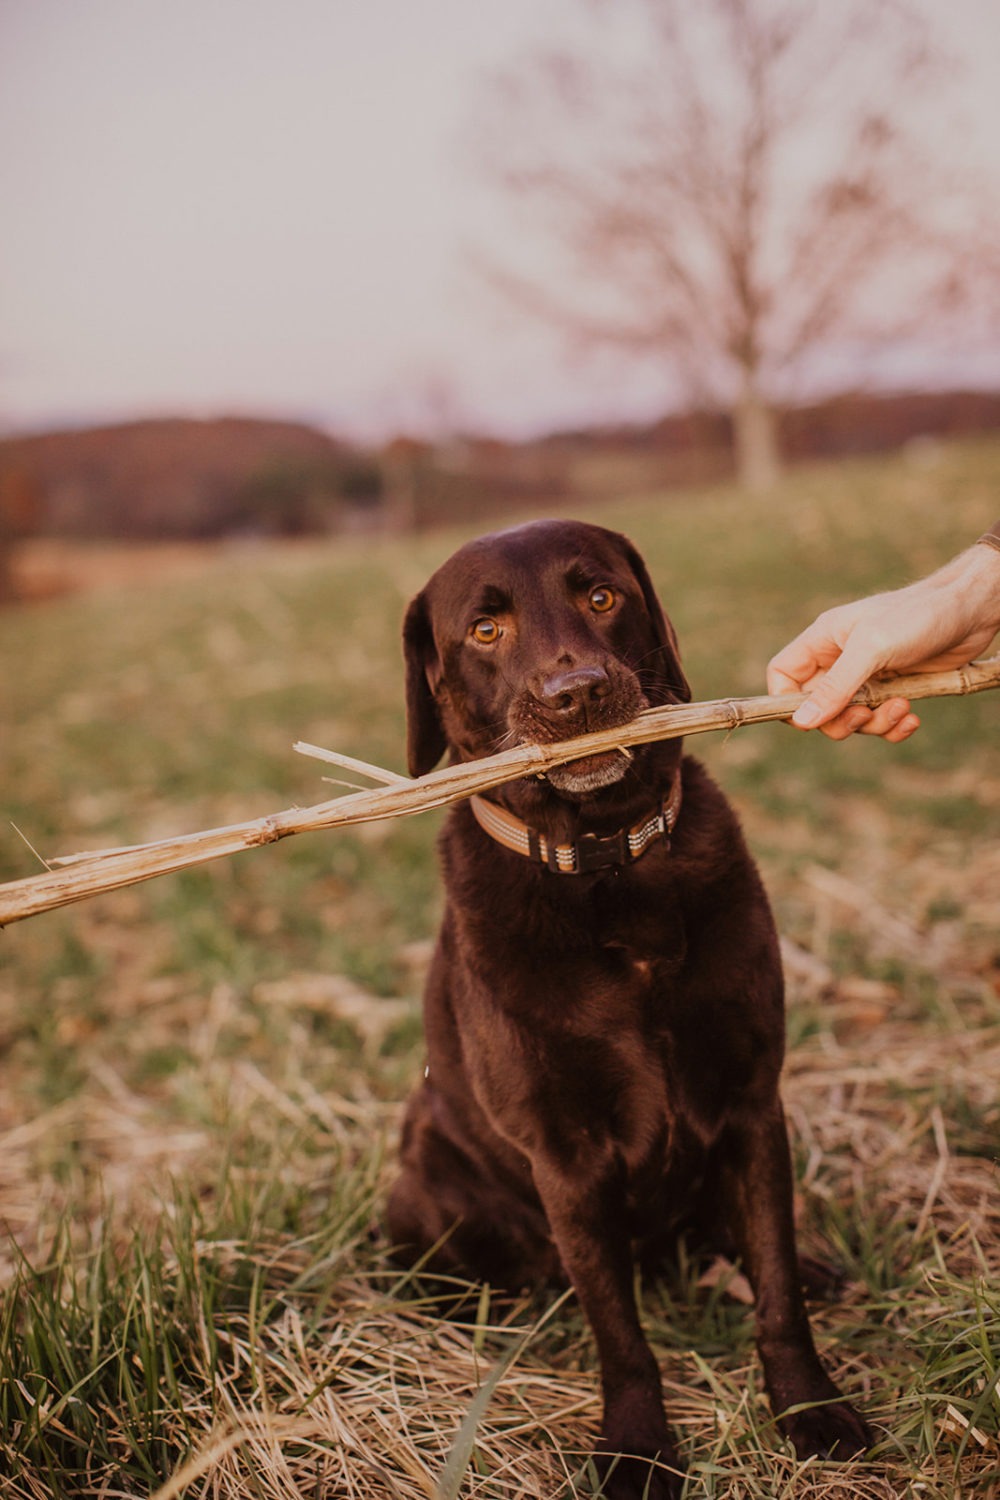 hand holds stick for dog chewing on it